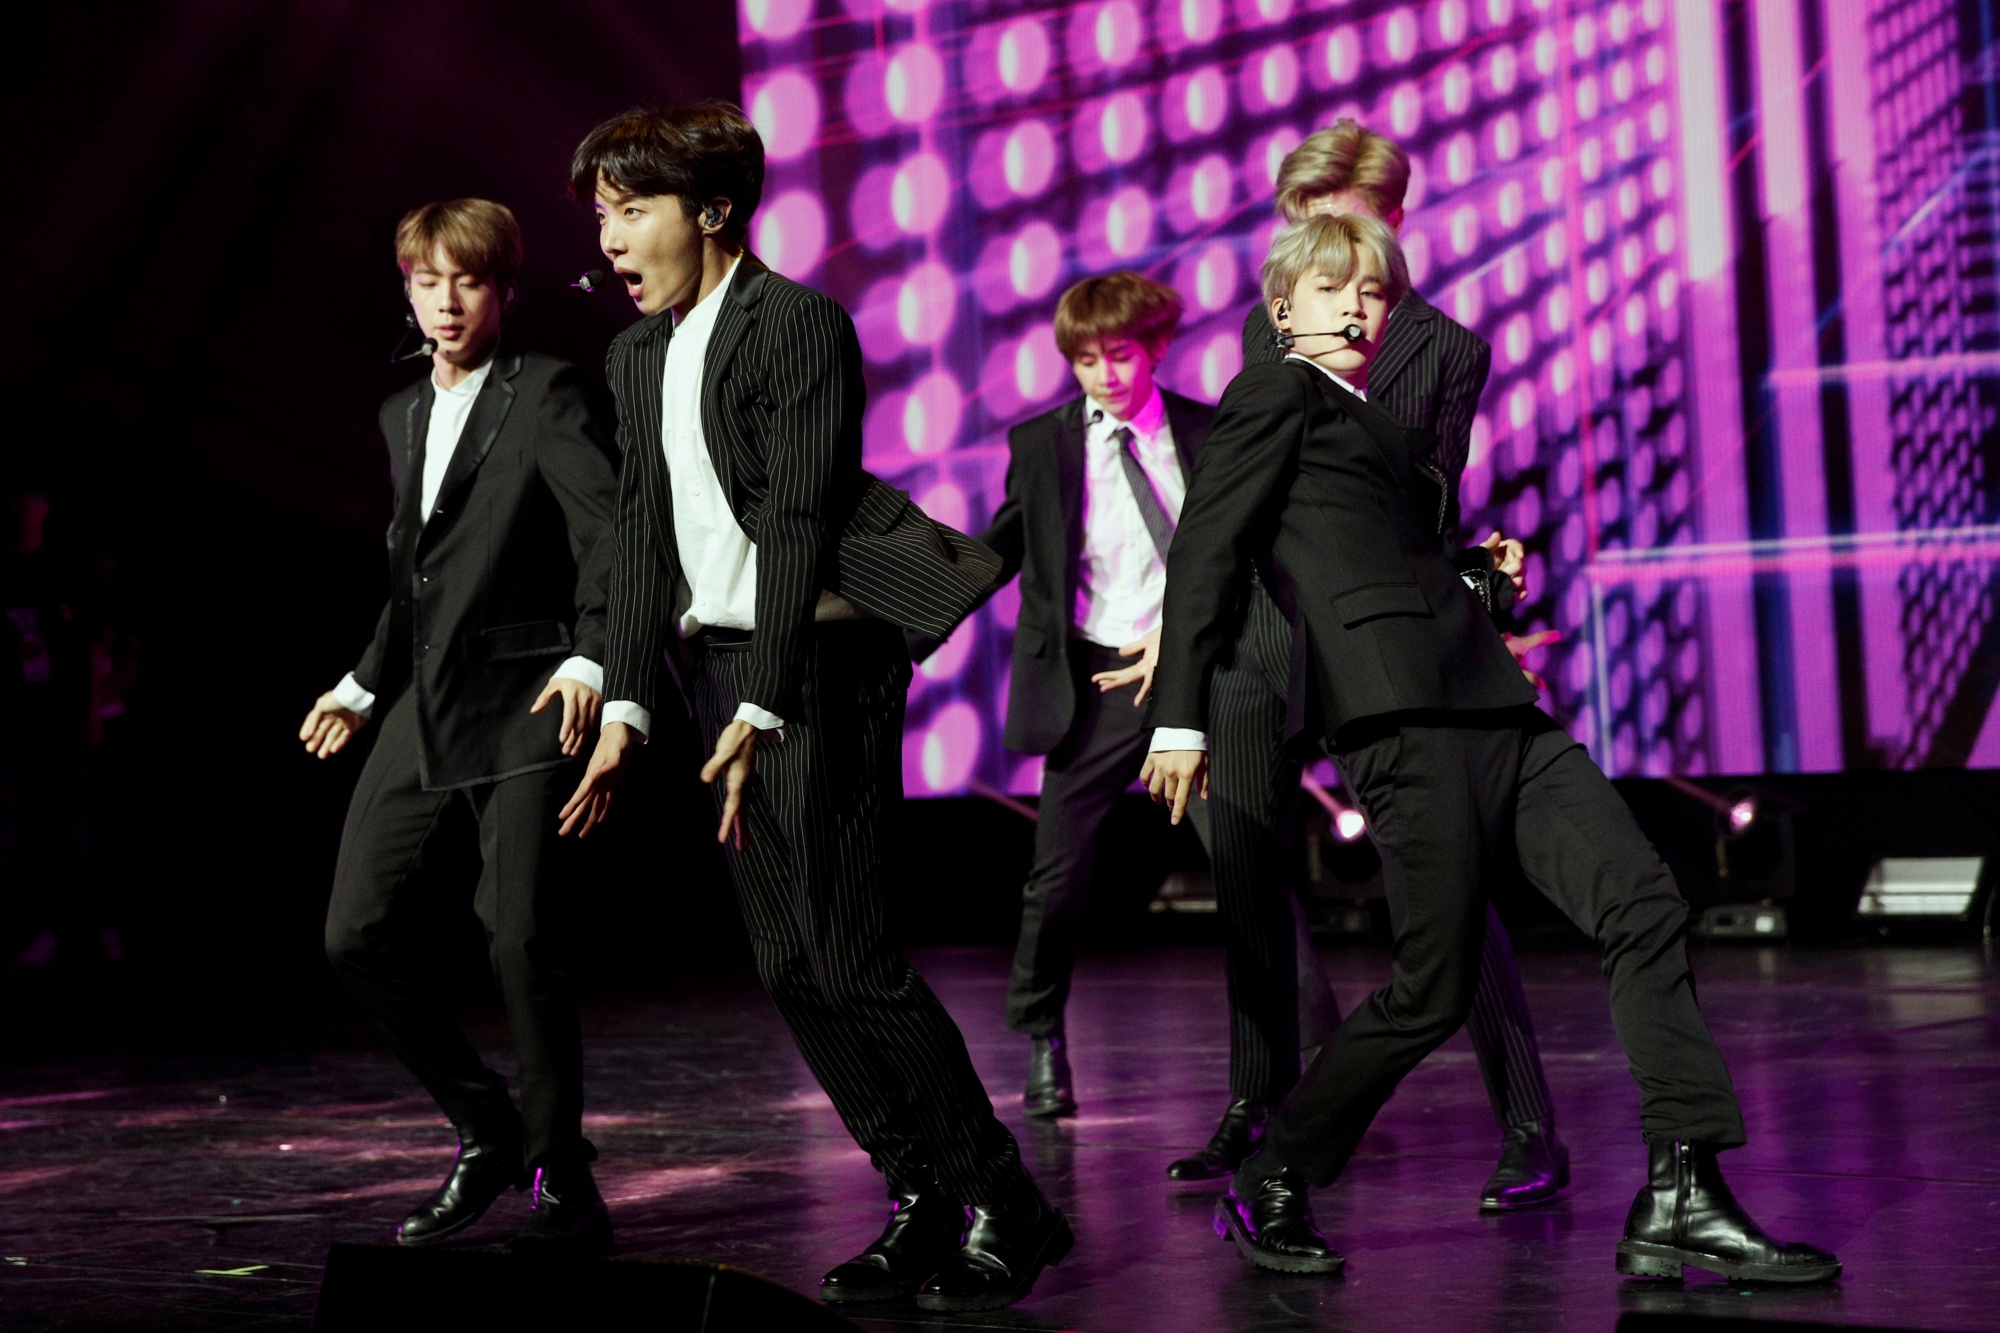 BTS Will Soon Be the First K-Pop Group to Address the United Nations